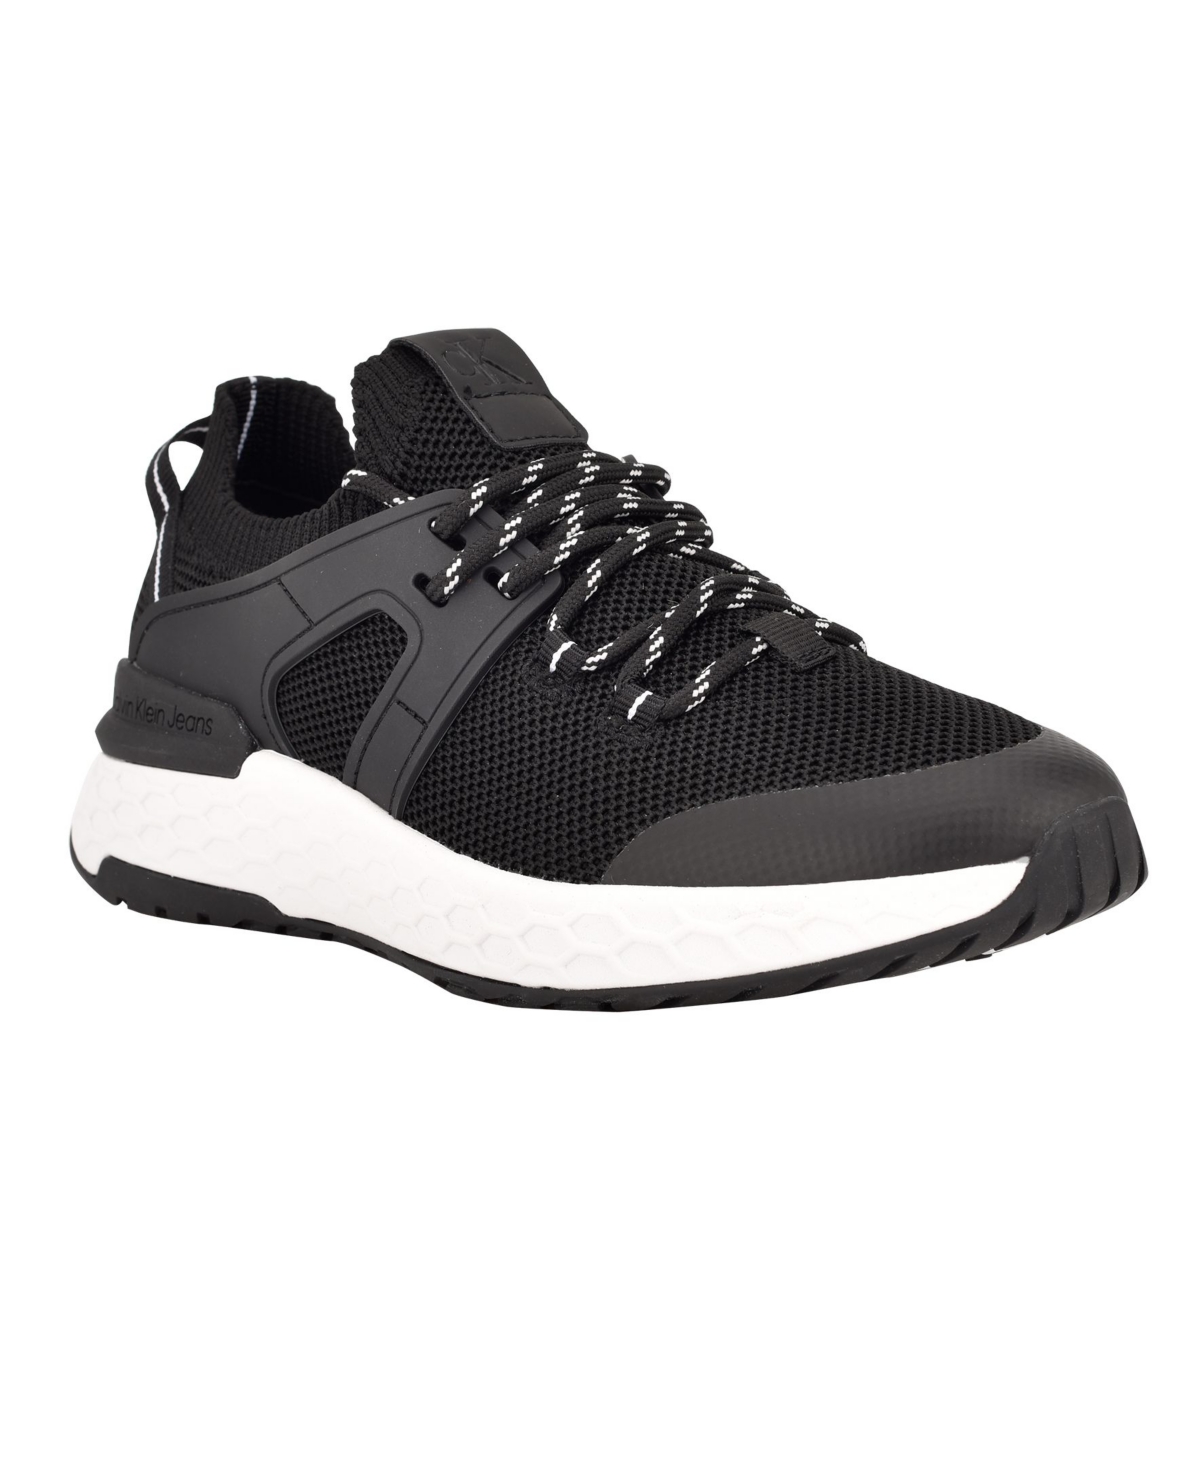 UPC 195972002326 product image for Calvin Klein Women's Aleah Lace-Up Sneakers Women's Shoes | upcitemdb.com